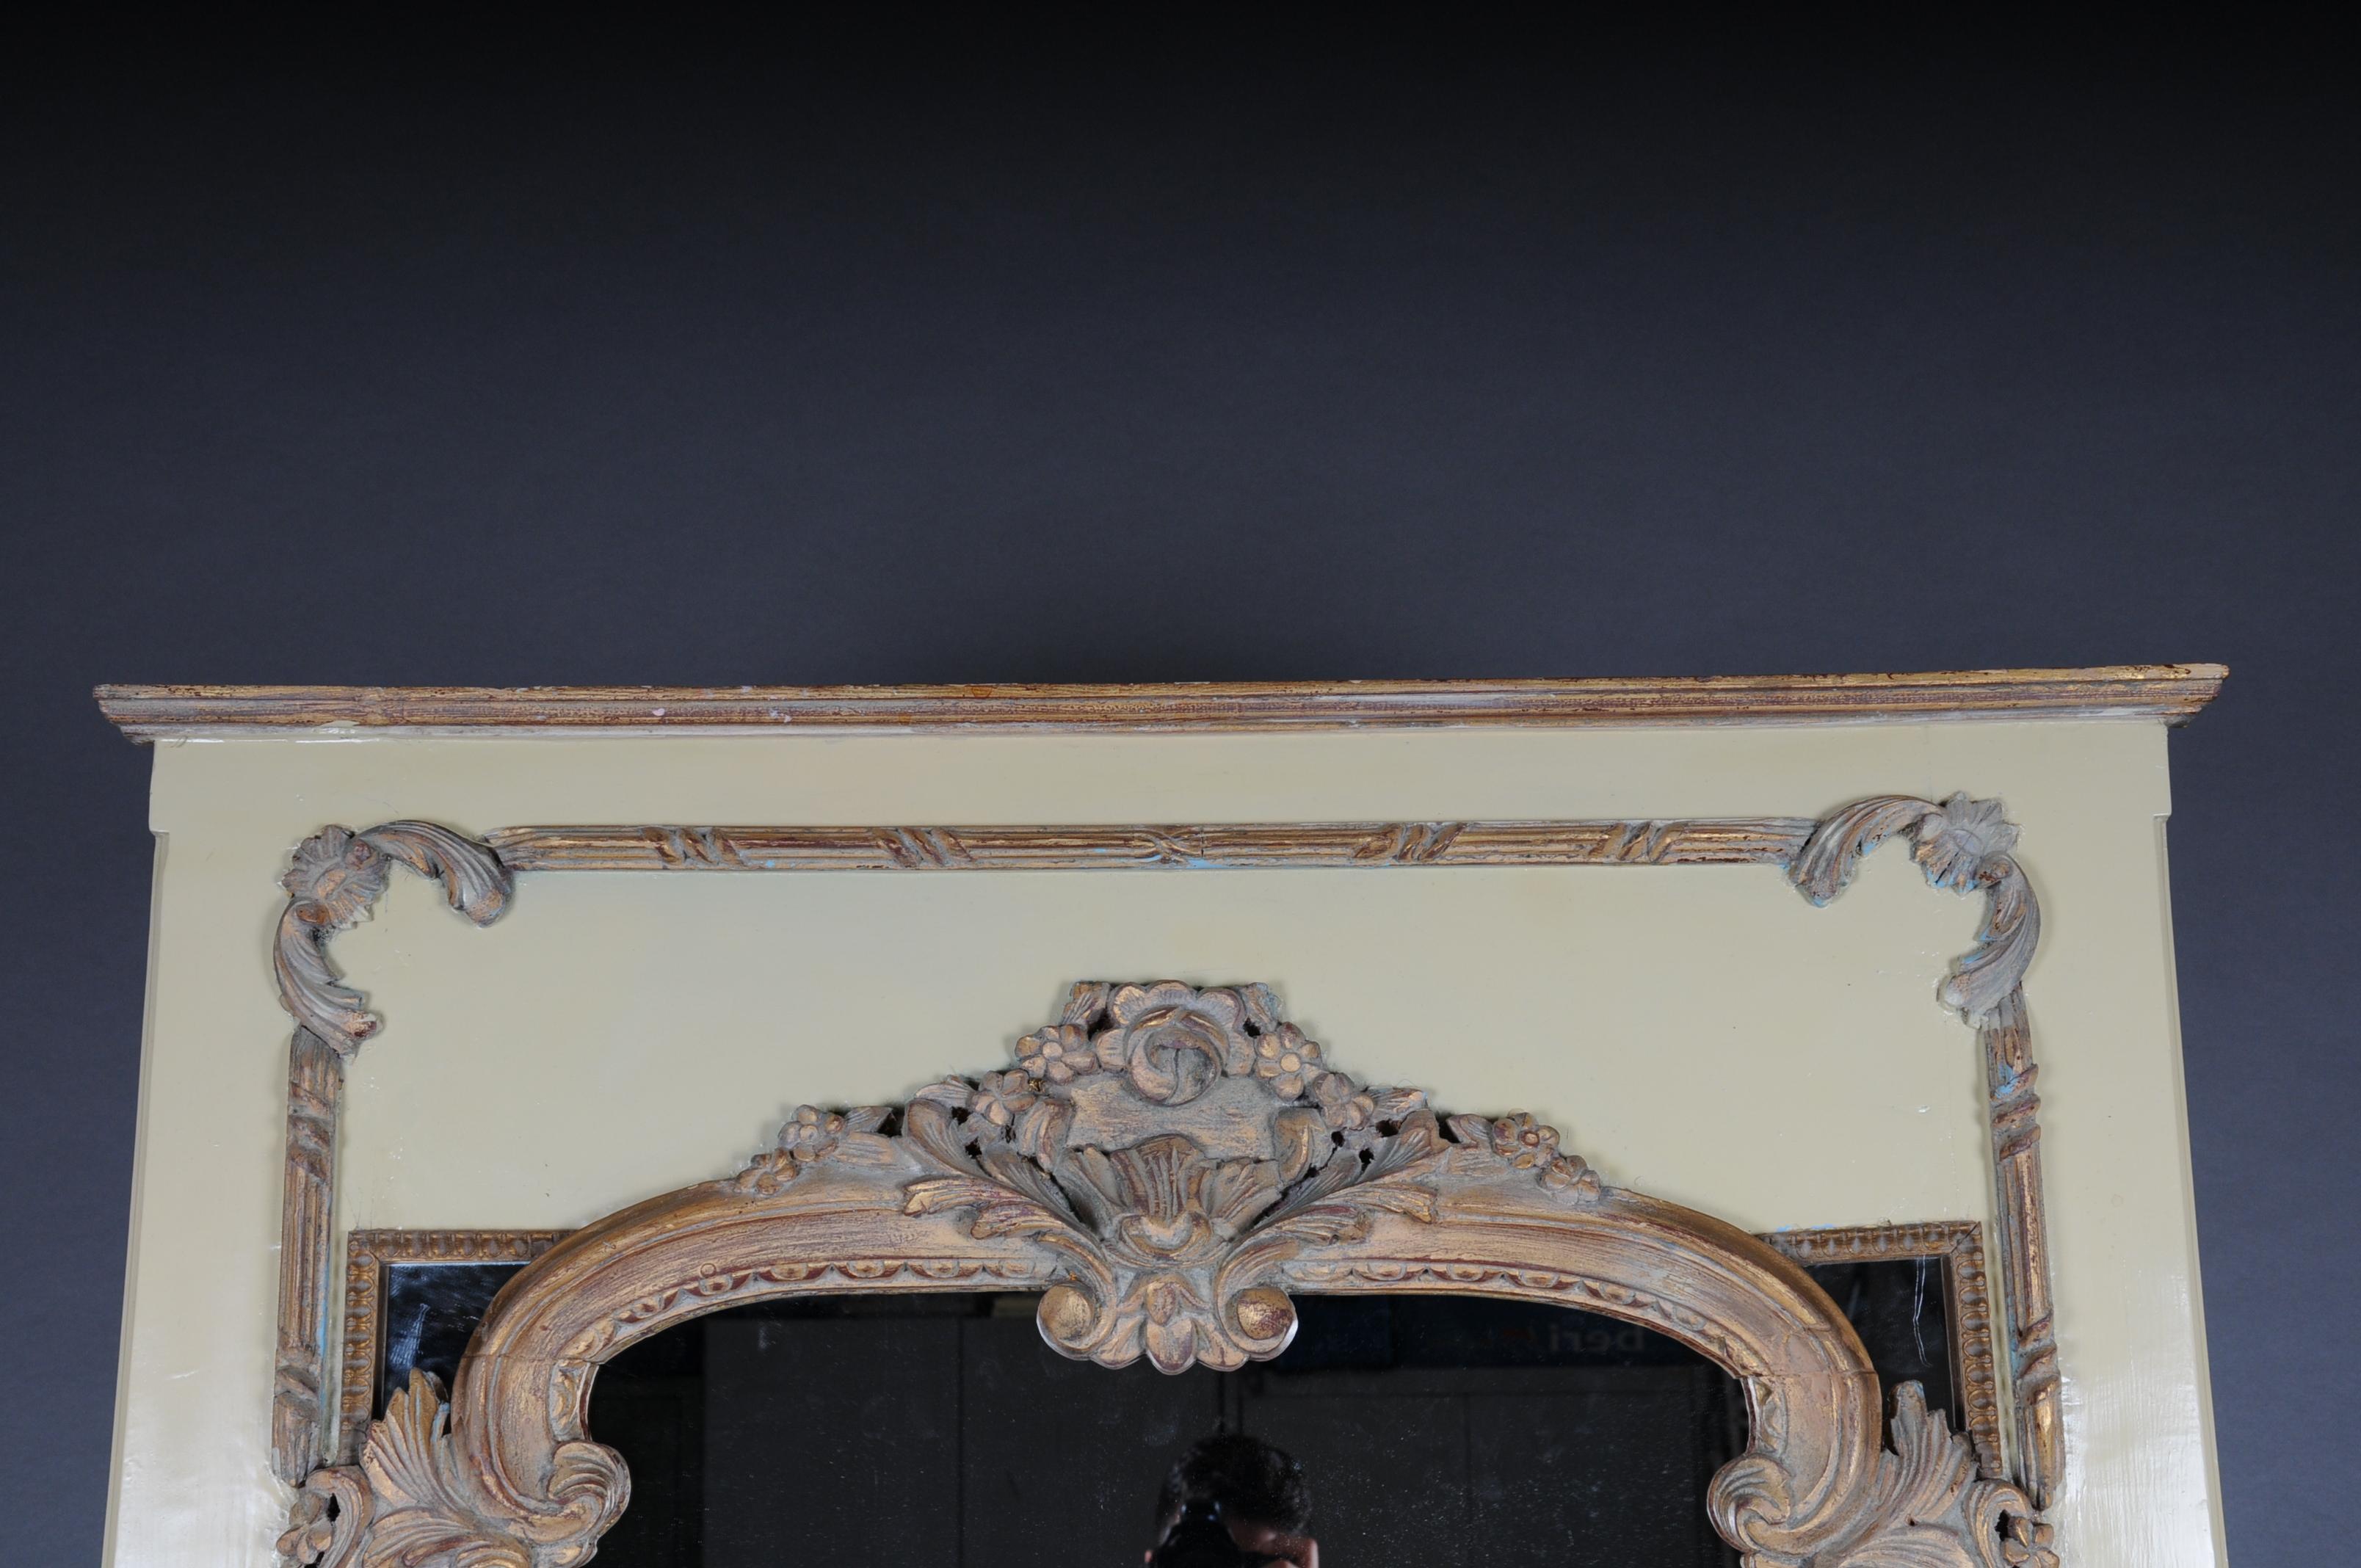 20th Century large classicism full length mirror, beechwood.

Solid wood, beech, rectangular wooden body, colored with classical carvings and decorative elements. Extremely decorative and magnificent.